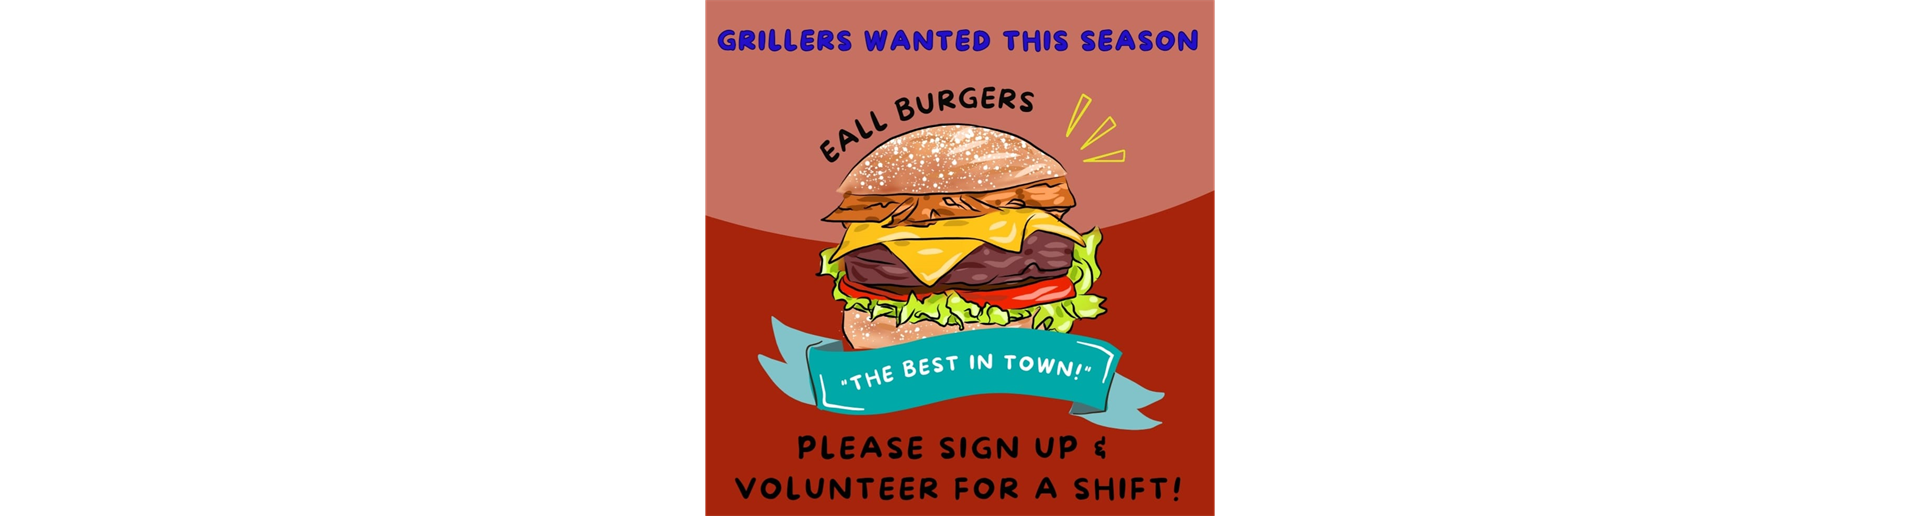 SIGN UP TO GRILL BURGERS